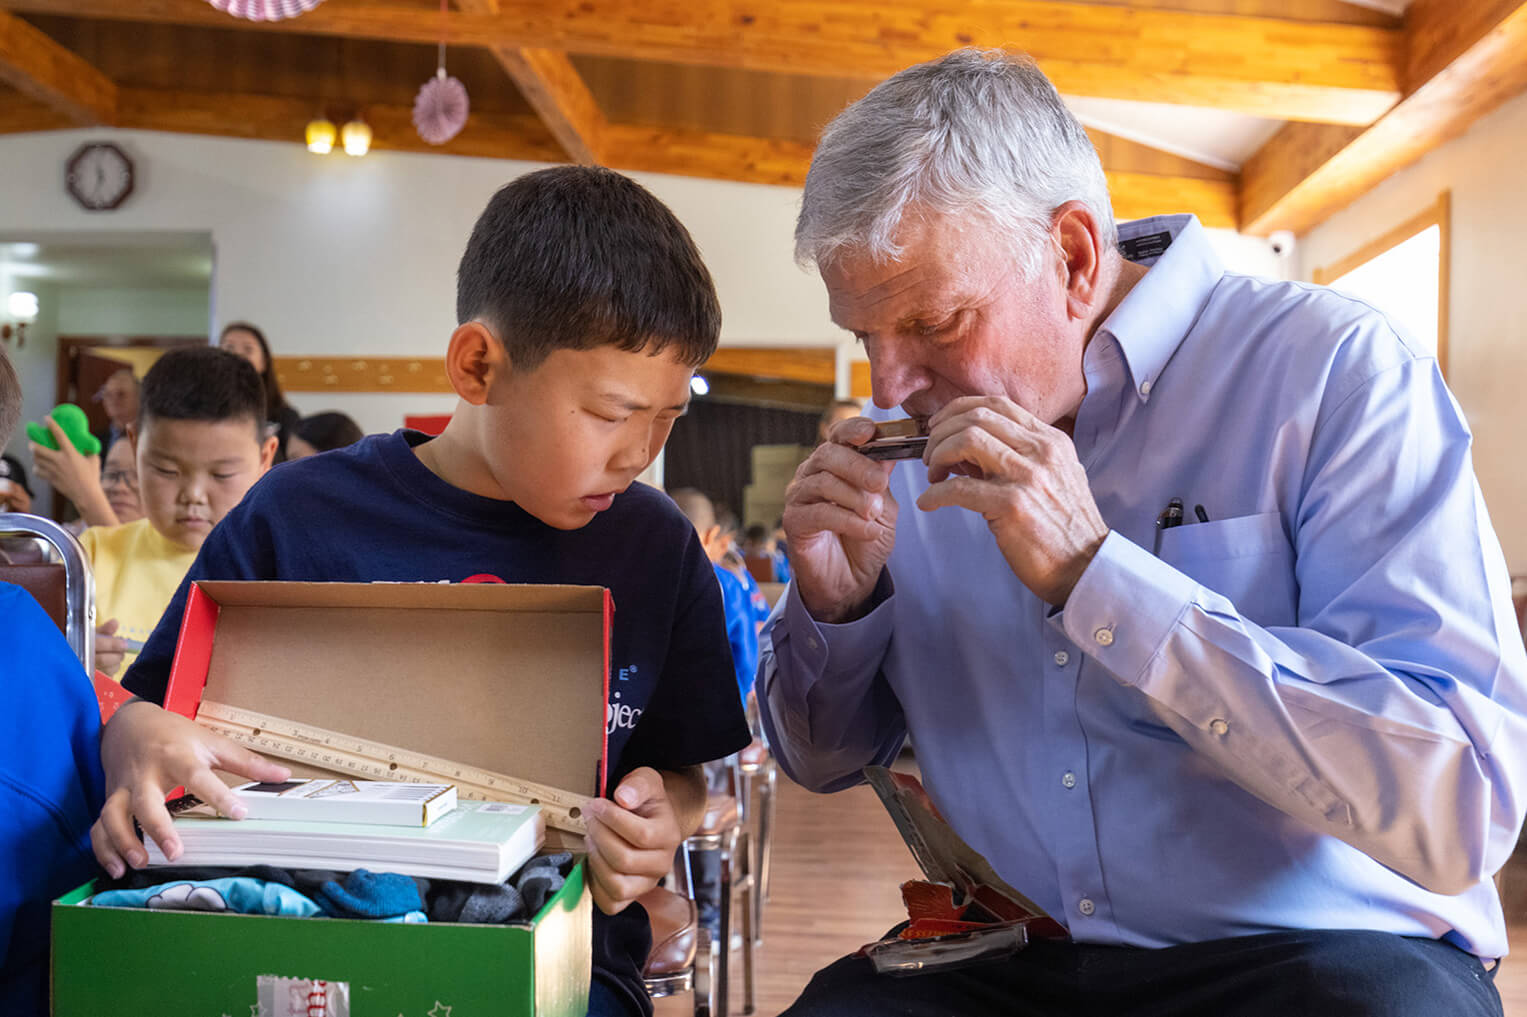 Franklin Graham shows Erdembayar how to work the harmonica that came in his Operation Christmas Child shoebox gift.